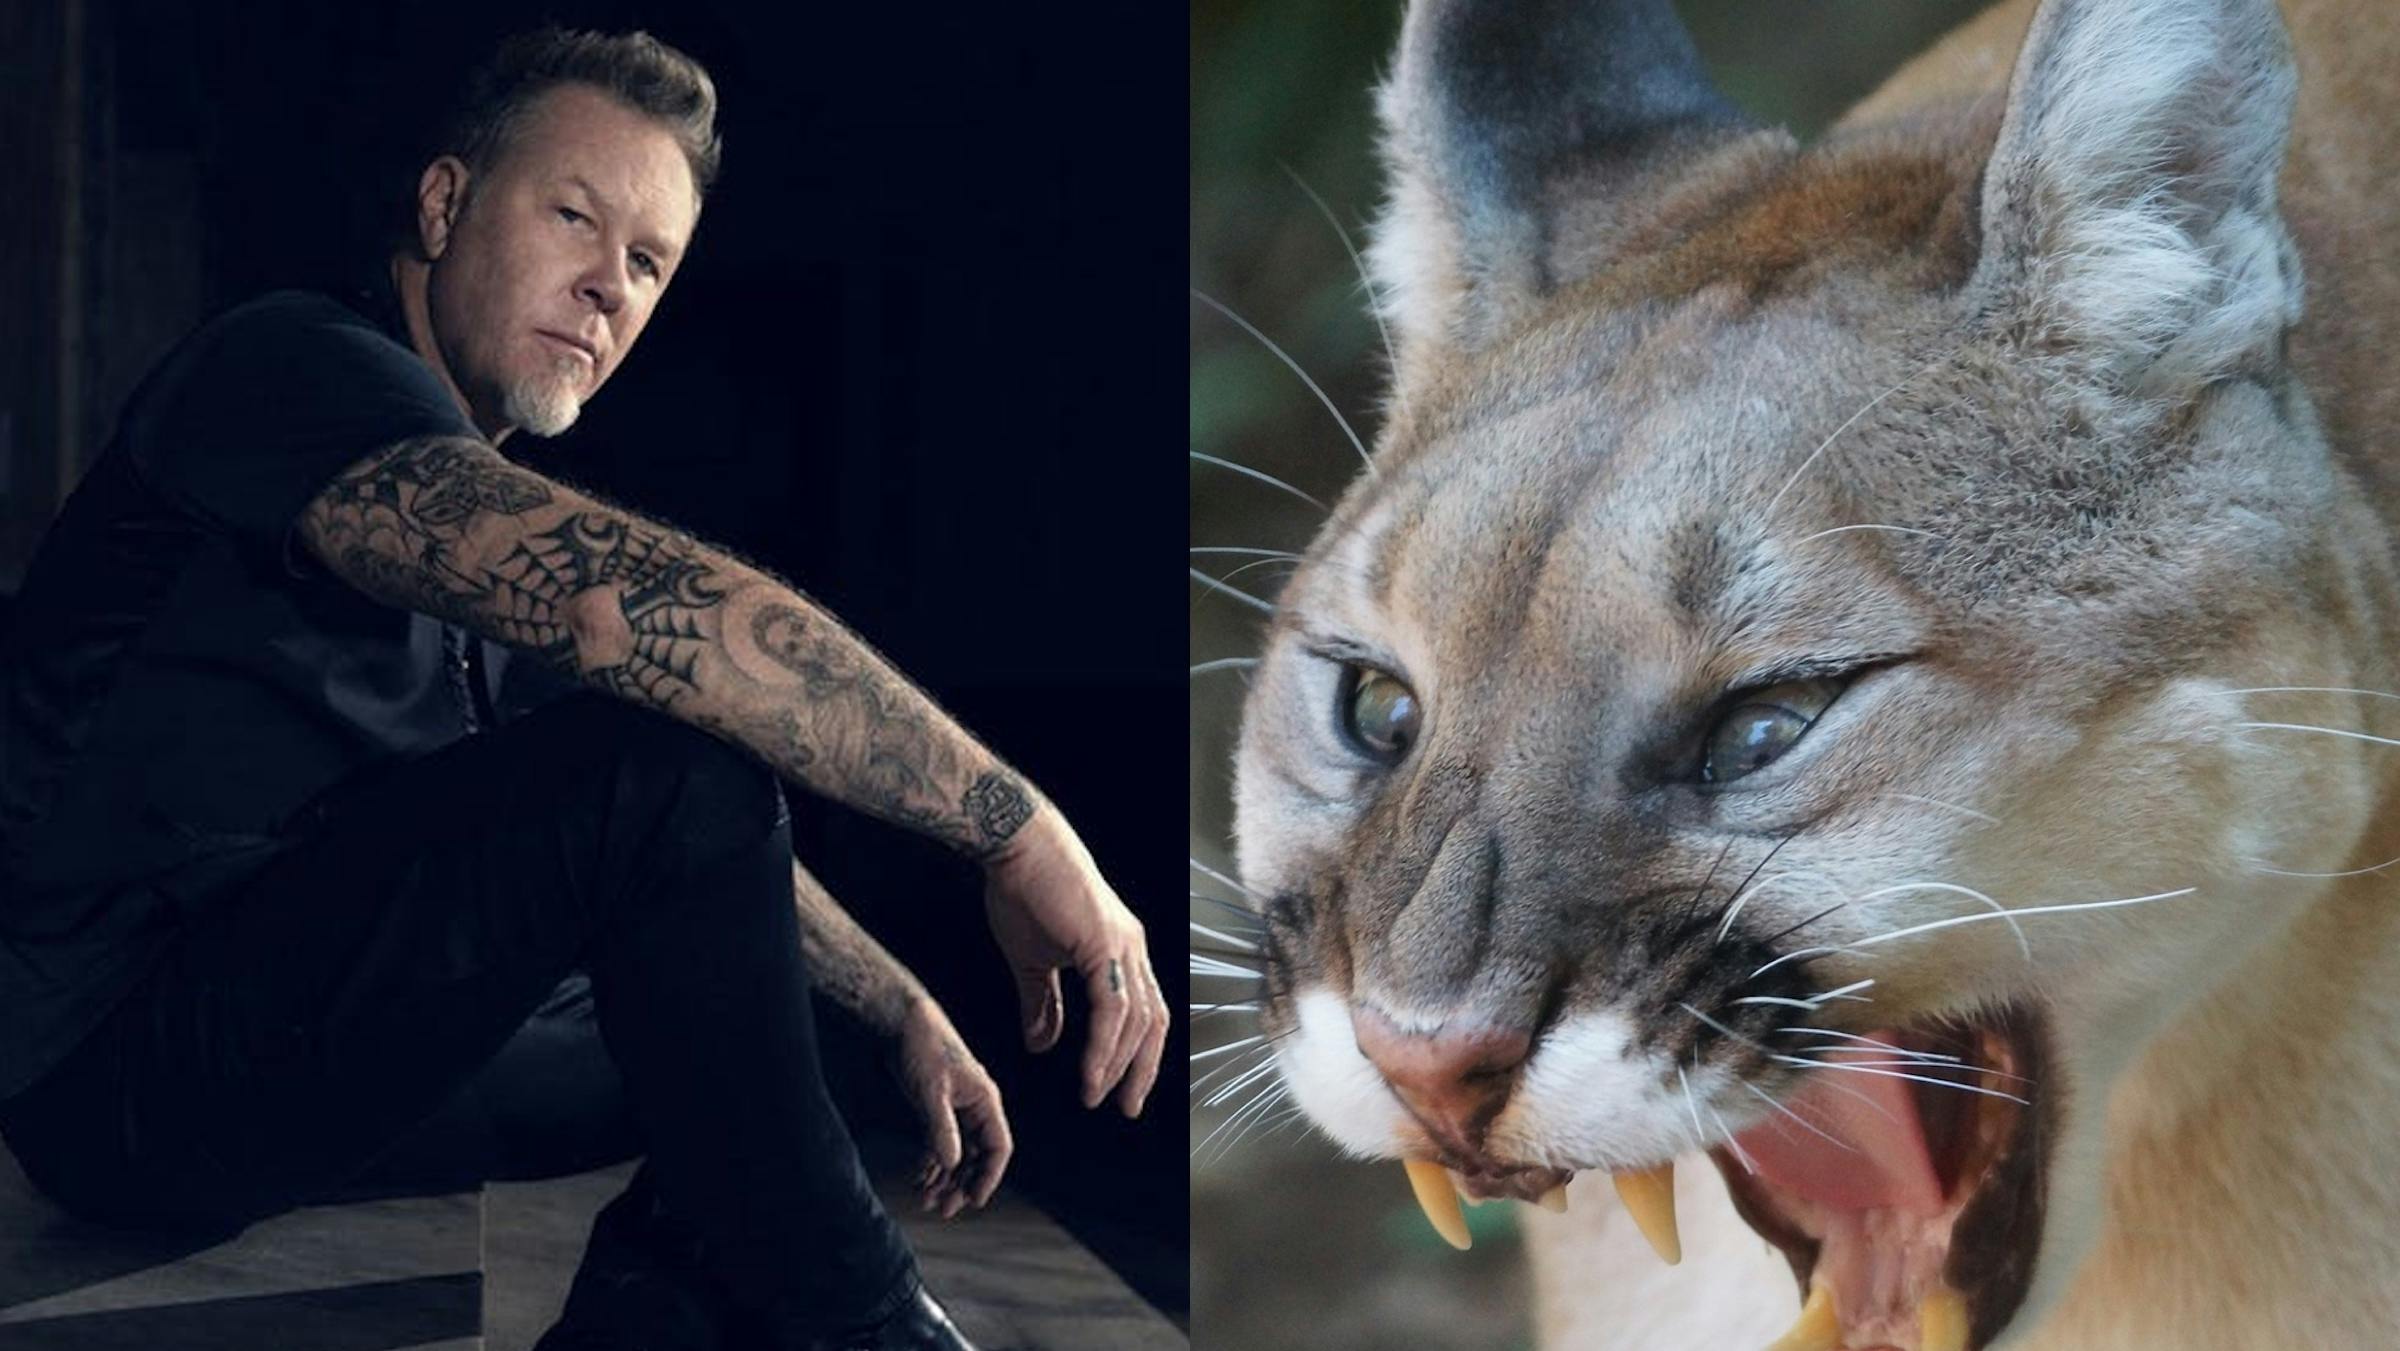 Woman Who Used Metallica To Scare Off Cougar Is Now Friends With James Hetfield